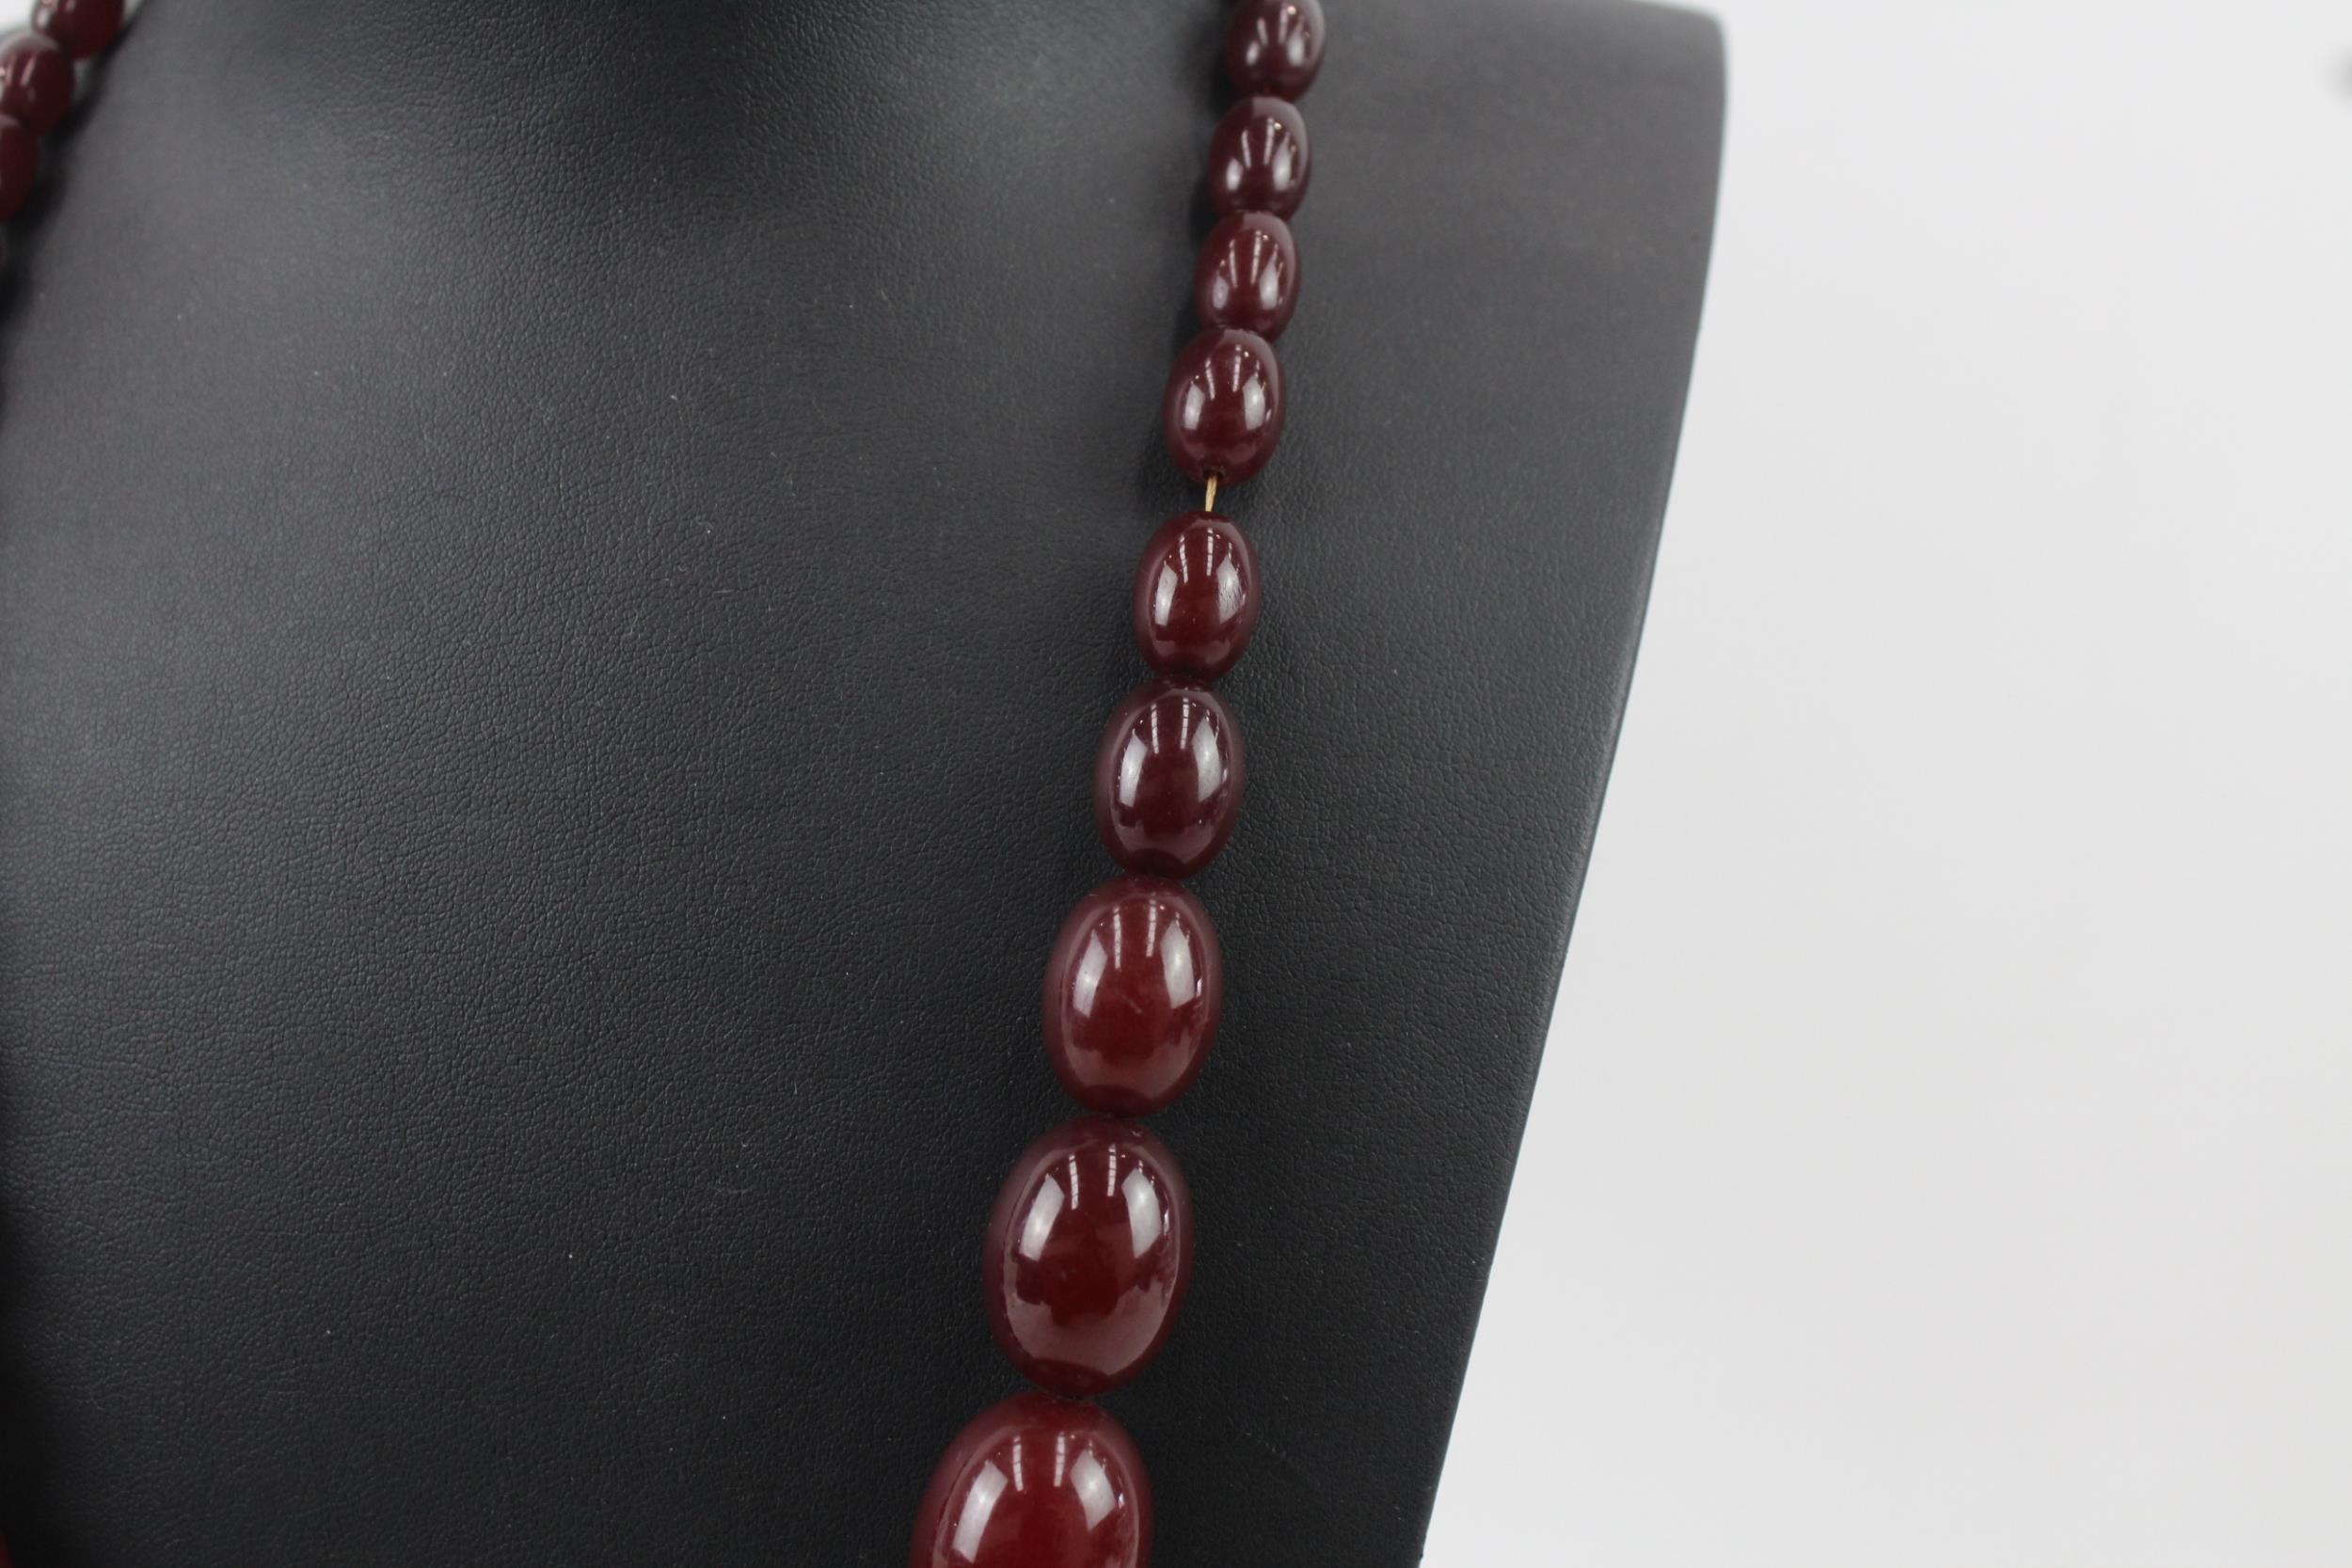 Cherry Bakelite graduated necklace with screw clasp (66g) - Image 2 of 7